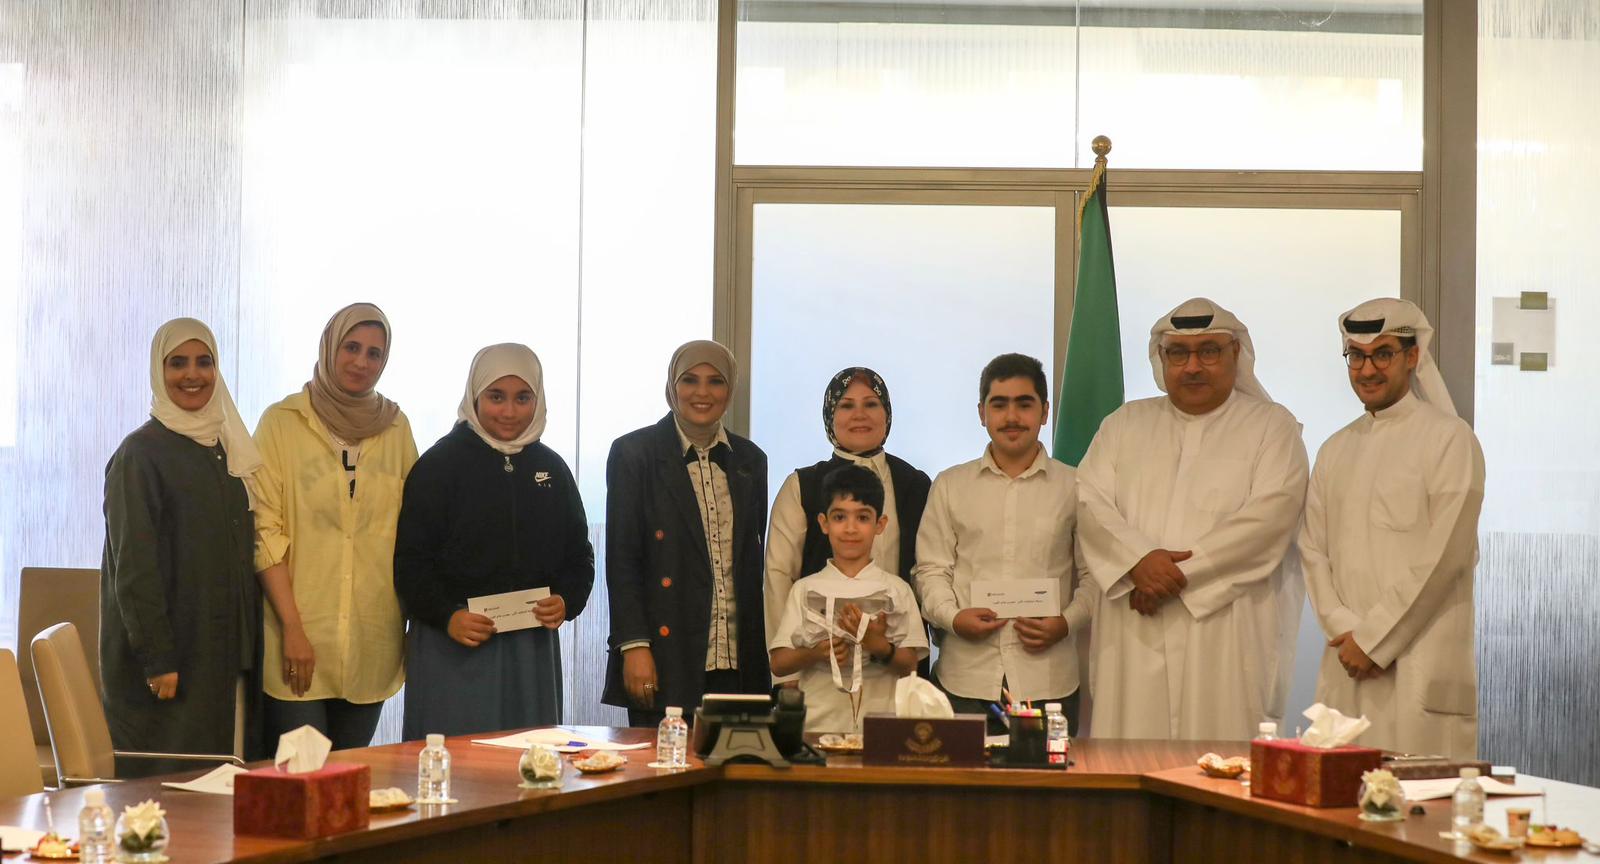 Microsoft, Ministry of Education reveal winners of Minecraft competition